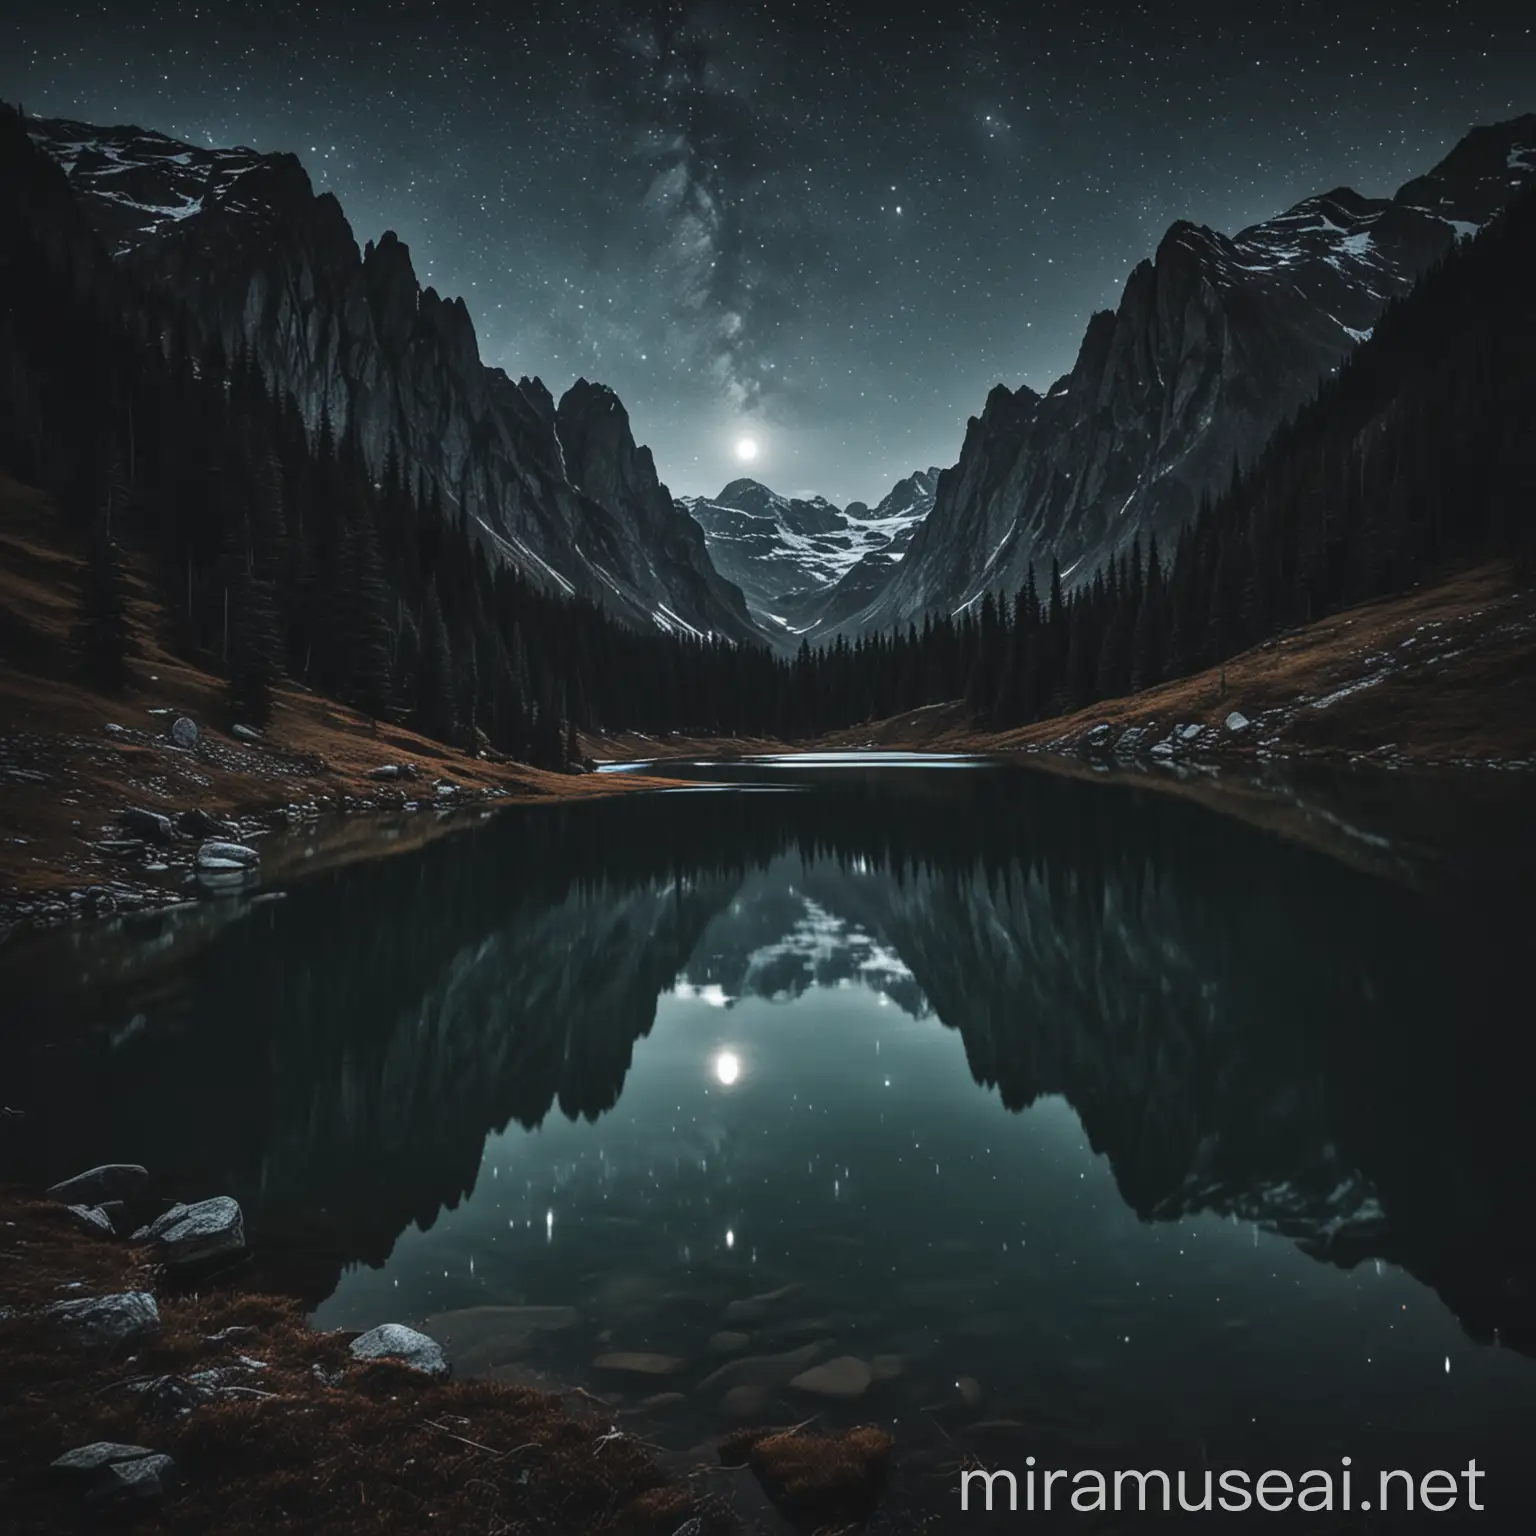 Serene Night Lake Surrounded by Majestic Mountains